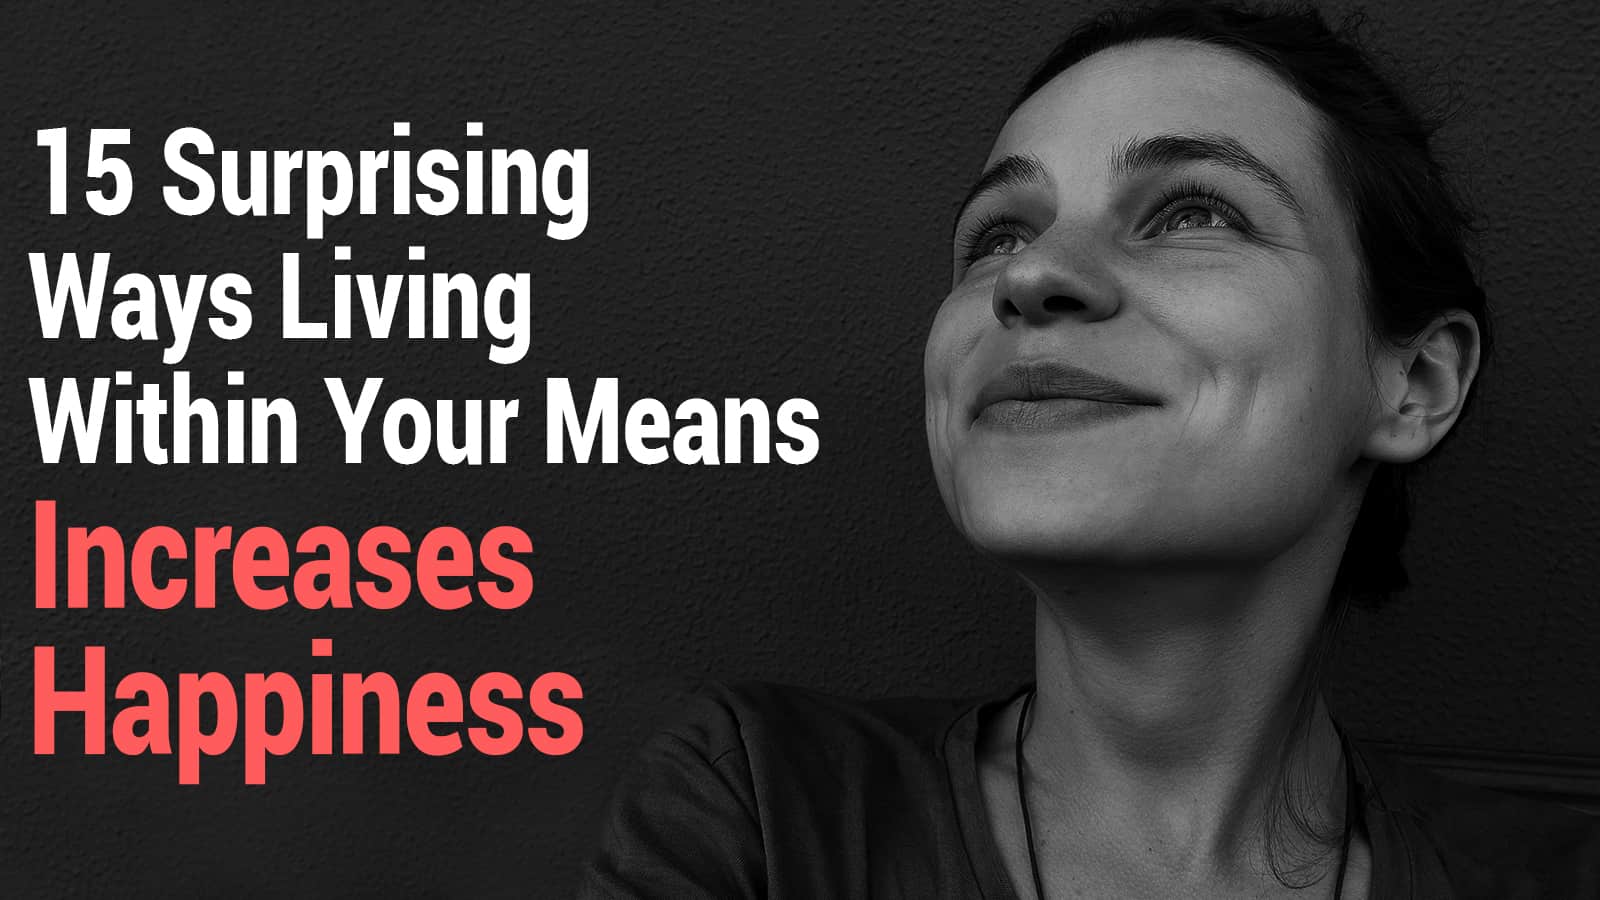 15 Surprising Ways Living Within Your Means Increases Happiness